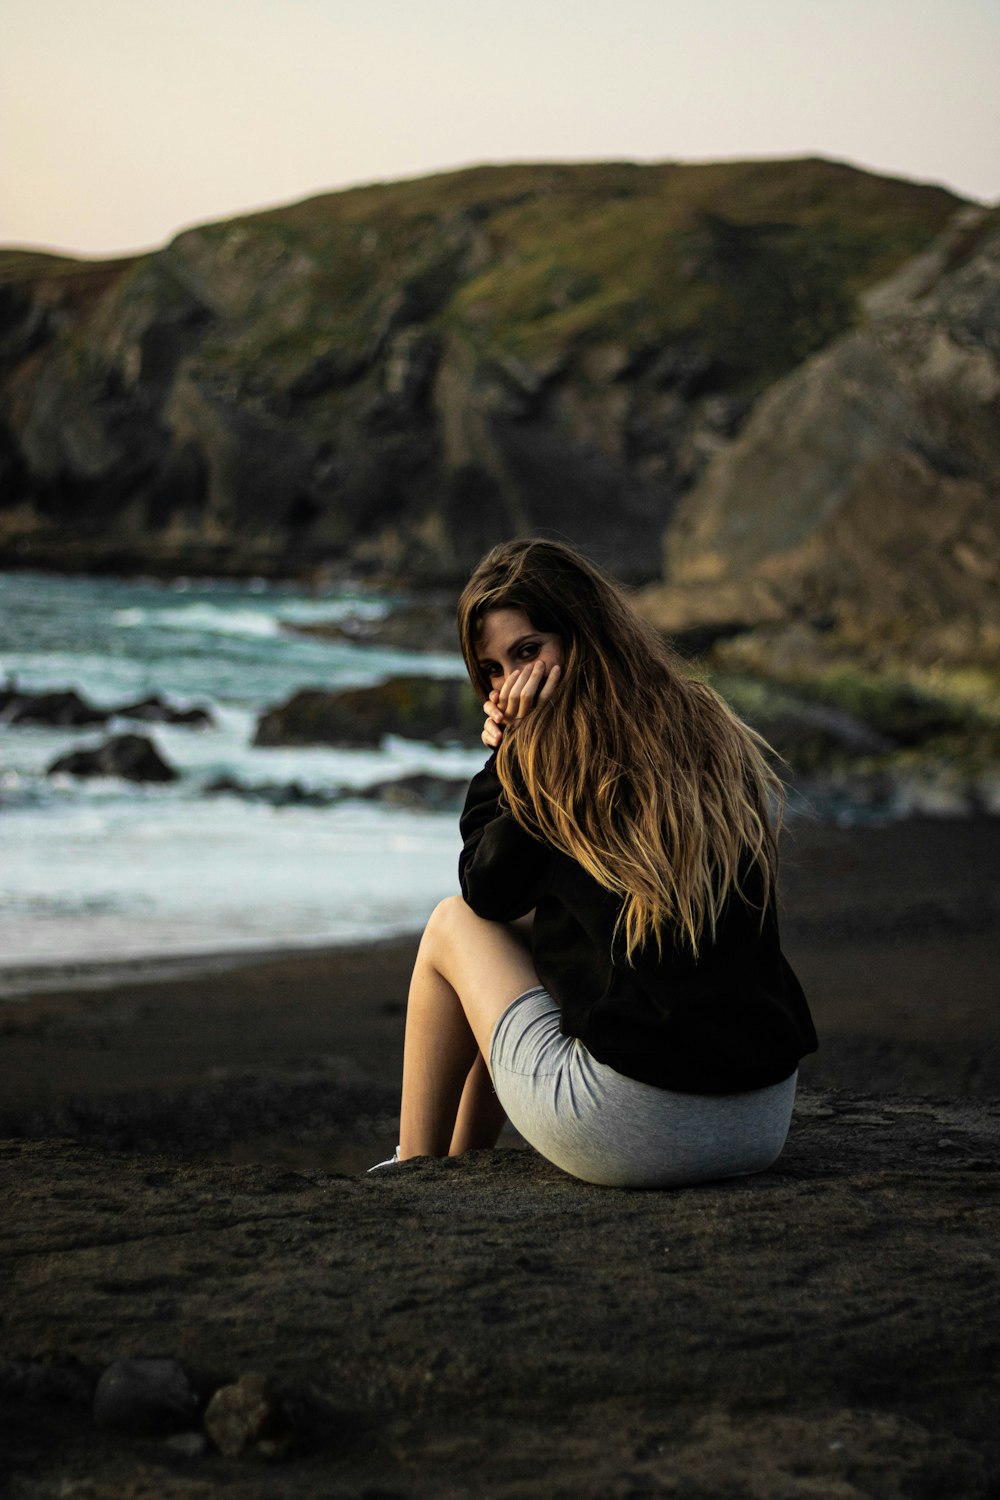 woman in black shirt and gray pants sitting on brown sand near body of water during